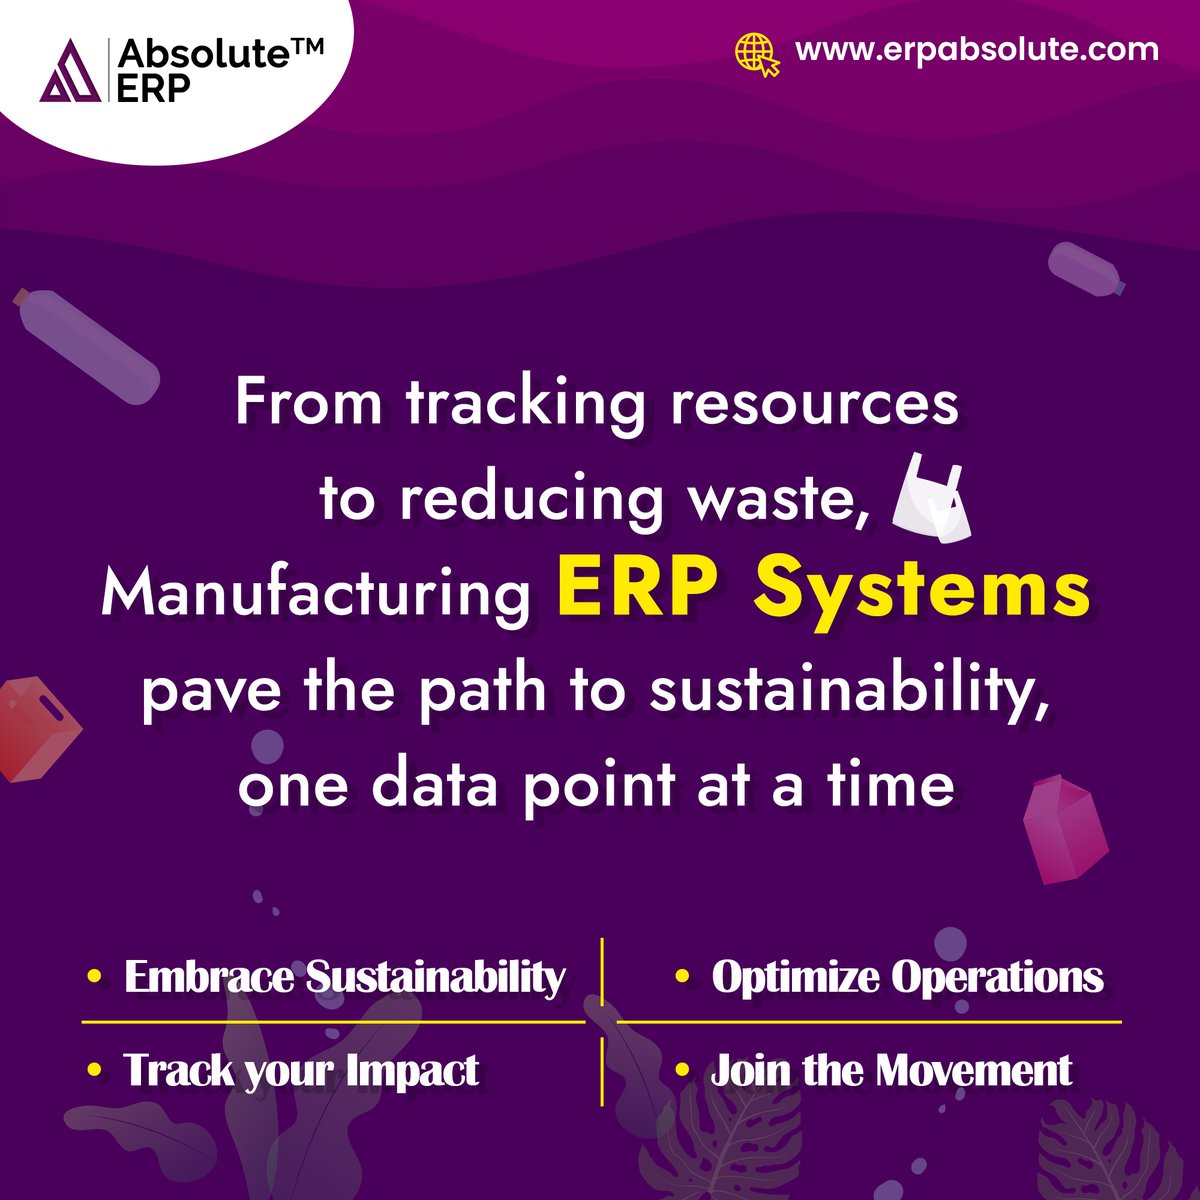 Discover how Manufacturing ERP systems are leading the charge in sustainability by tracking resource usage, reducing waste, and achieving environmental goals. Learn more- shorturl.at/dilL5

#Manufacturingerpsystems #ERPsystems #goals #erpsoftware #manufacturingerp